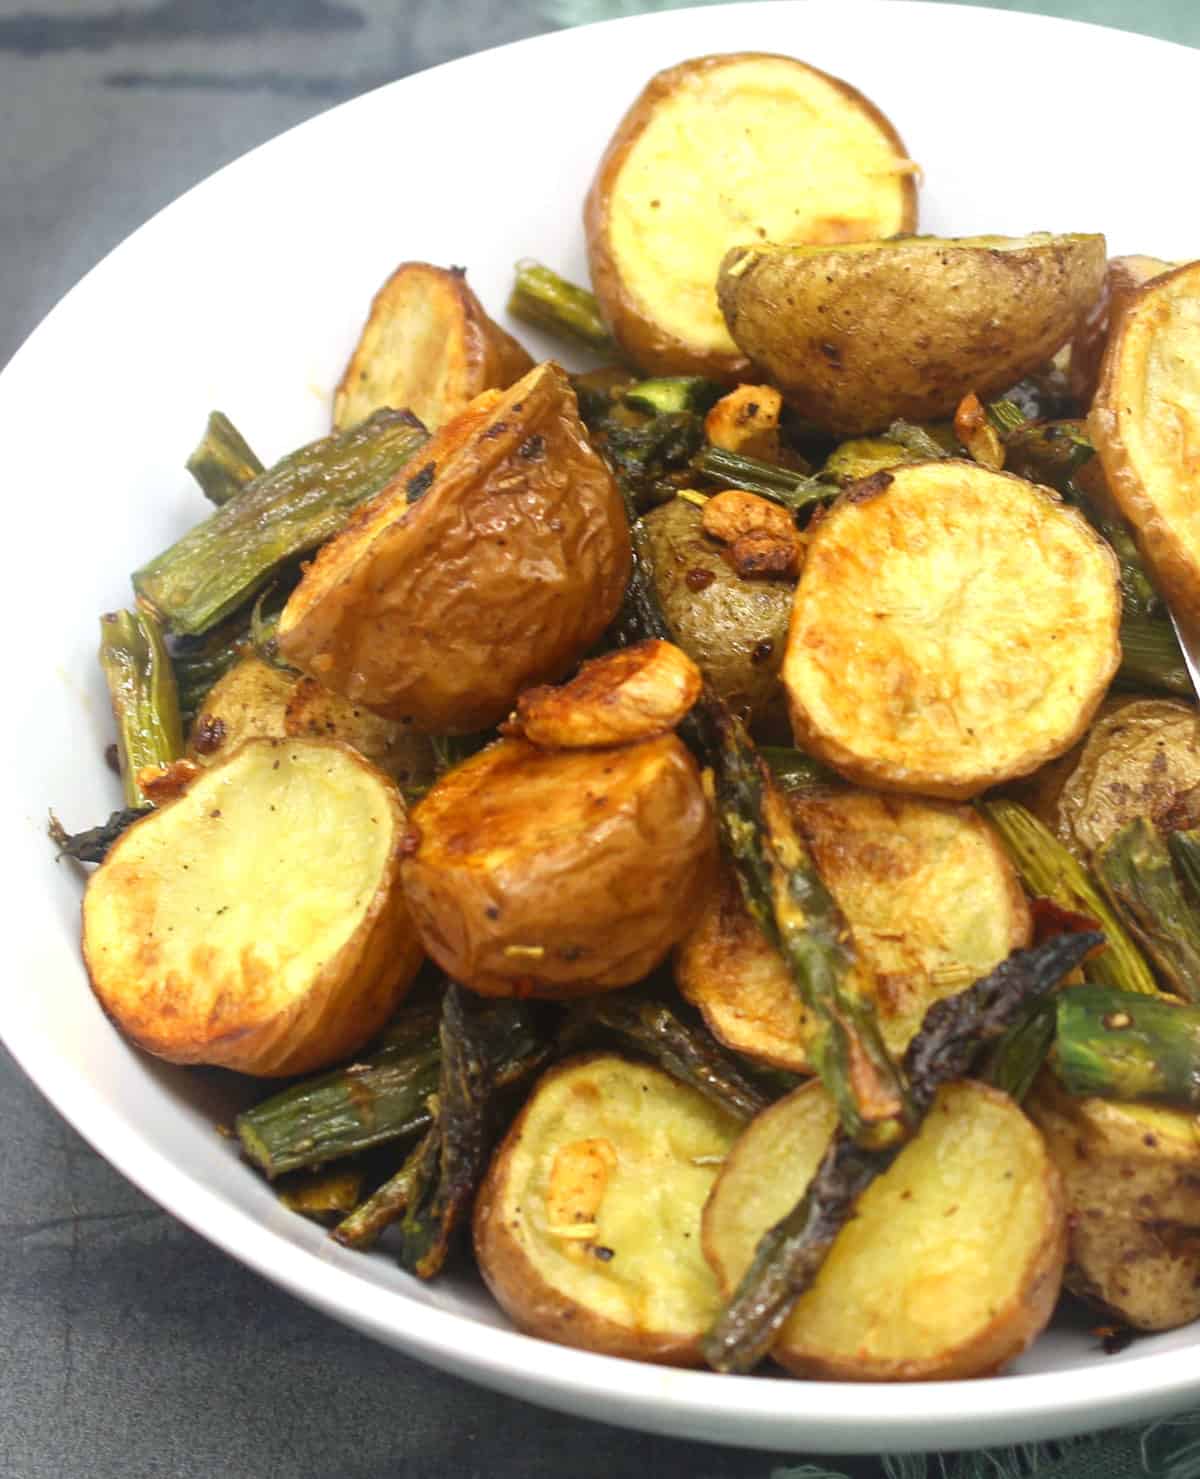 Roasted asparagus and potatoes with garlicky bits in white bowl.